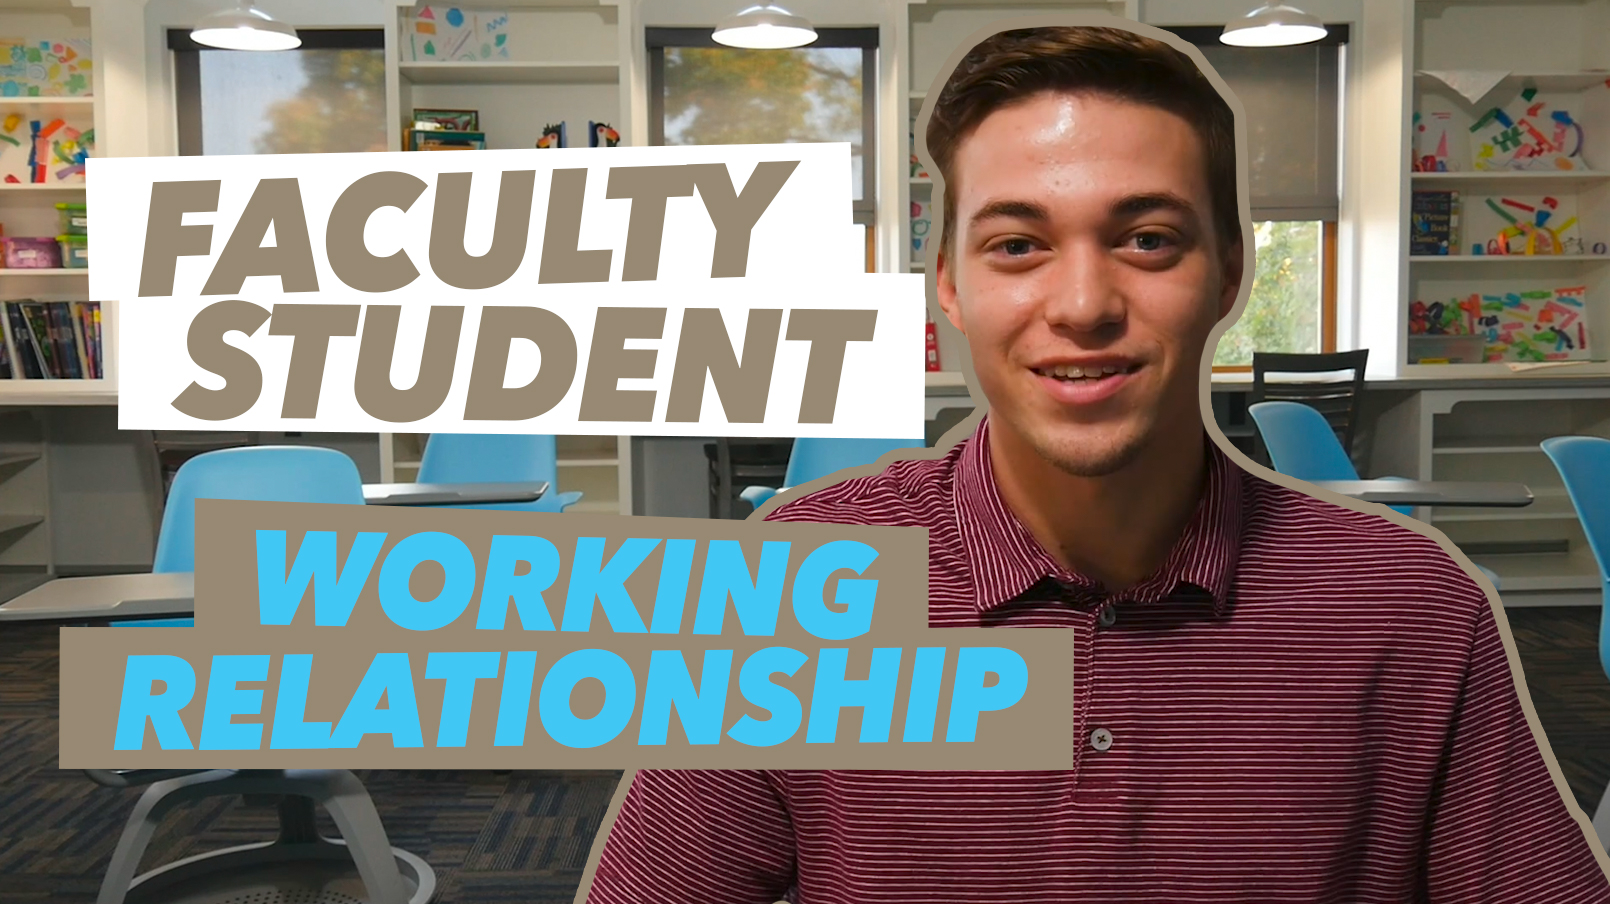 Faculty and student relationship video